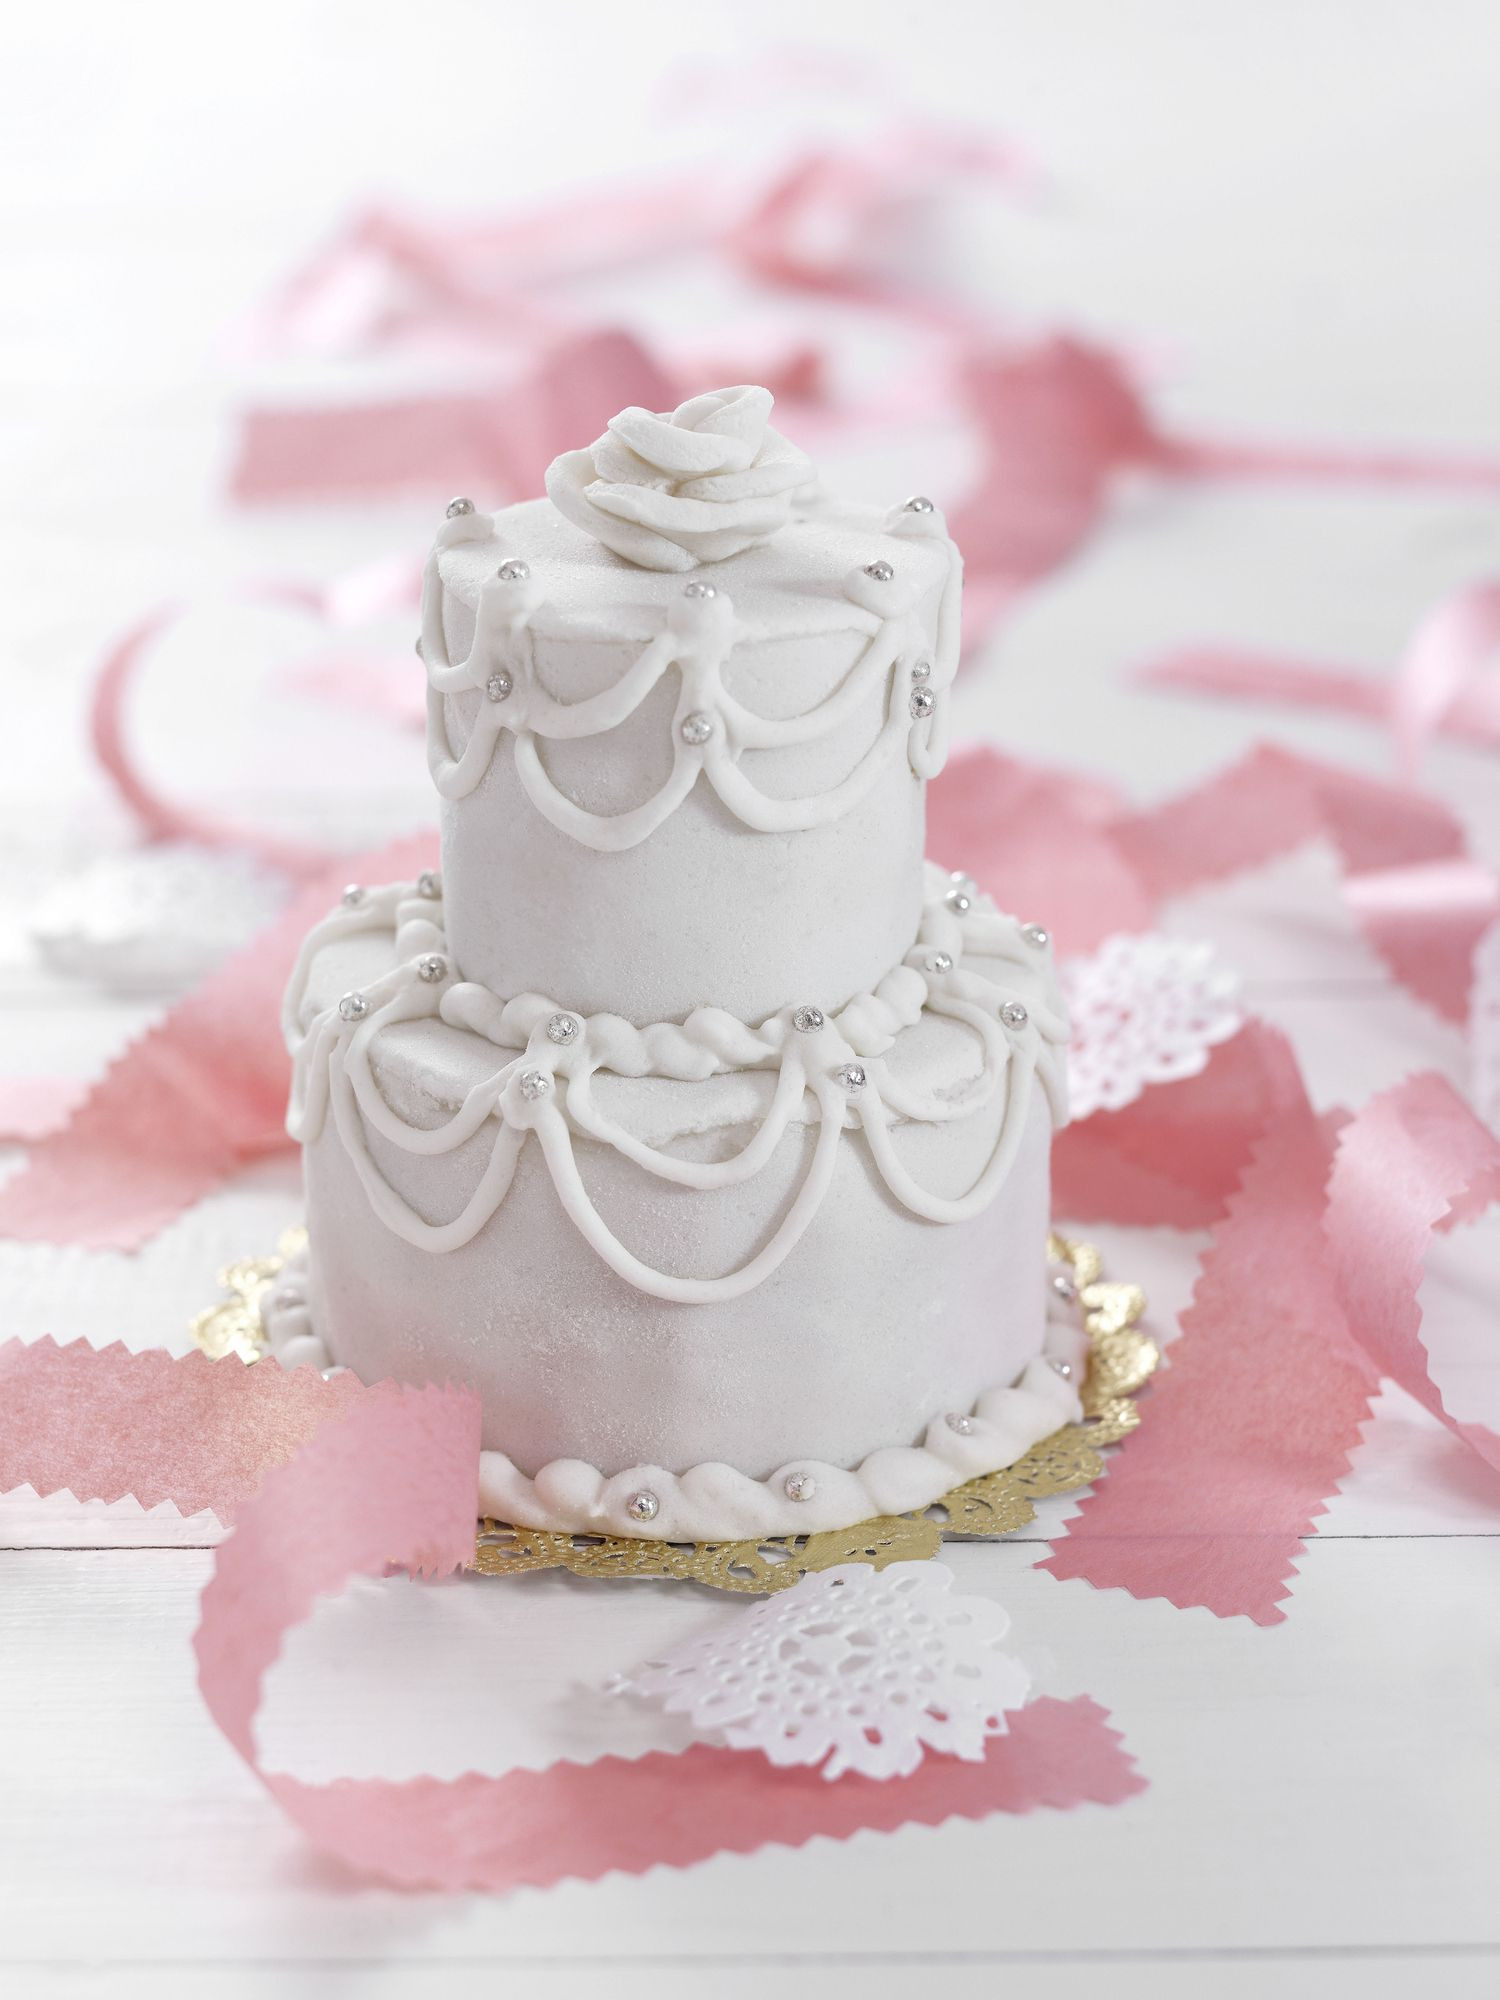 Making Wedding Cakes
 How to Make a Wedding Cake a Beginner s Guide